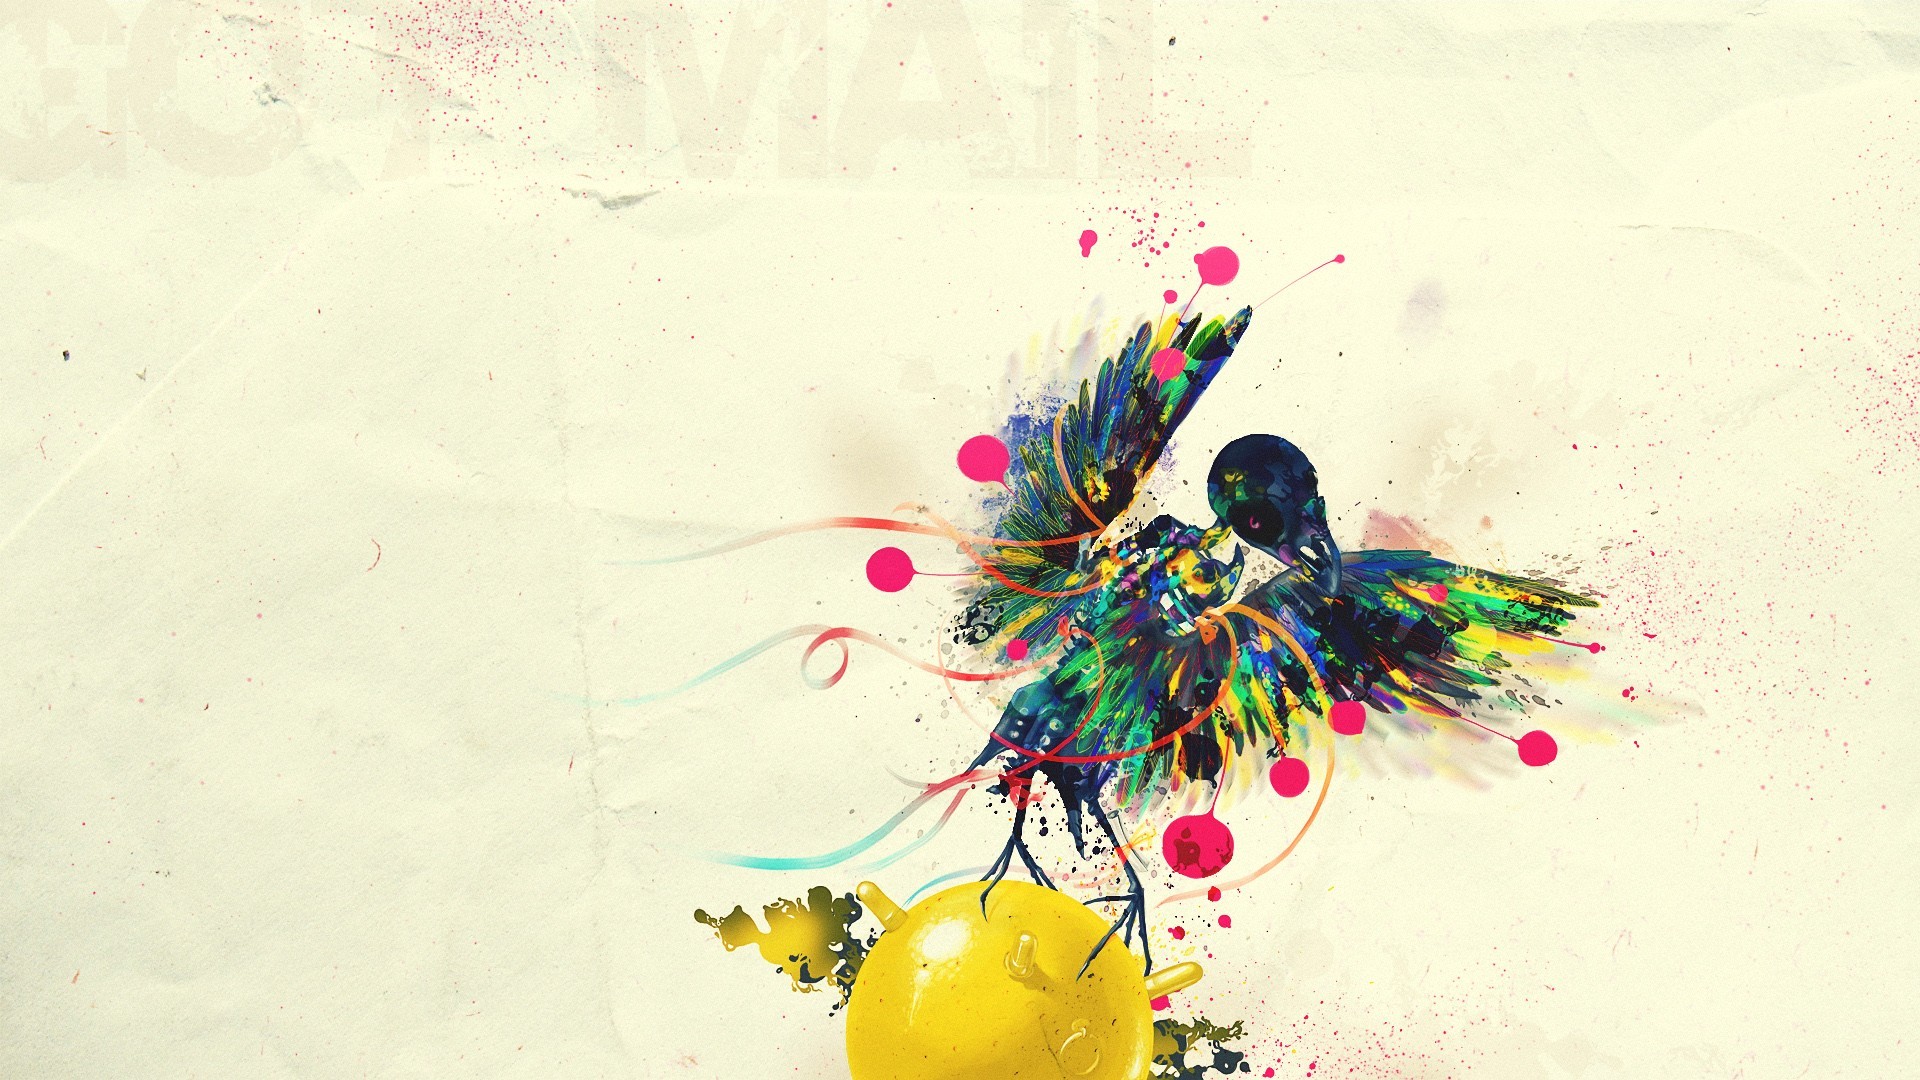 General 1920x1080 graphic design shapes birds animals artwork colorful simple background